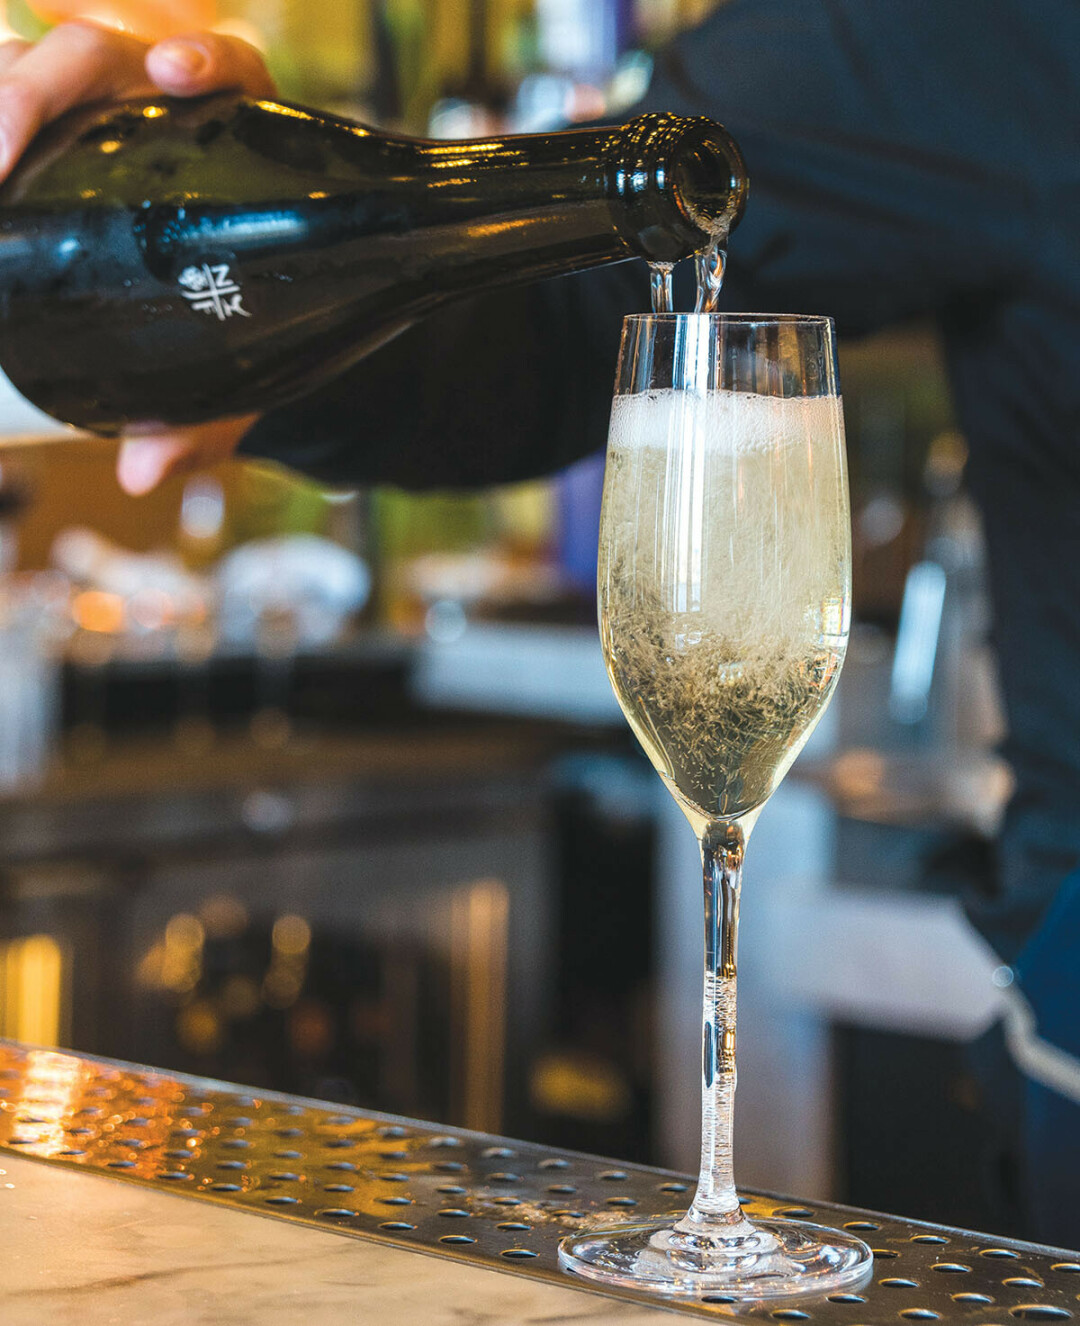 SPARKLE WITH SPARKLING WINE. This year, why go simple? For your New Year's celebrations, take a tip from The Wine Guy in Eau Claire, and check out a few yummy sparkling wines.